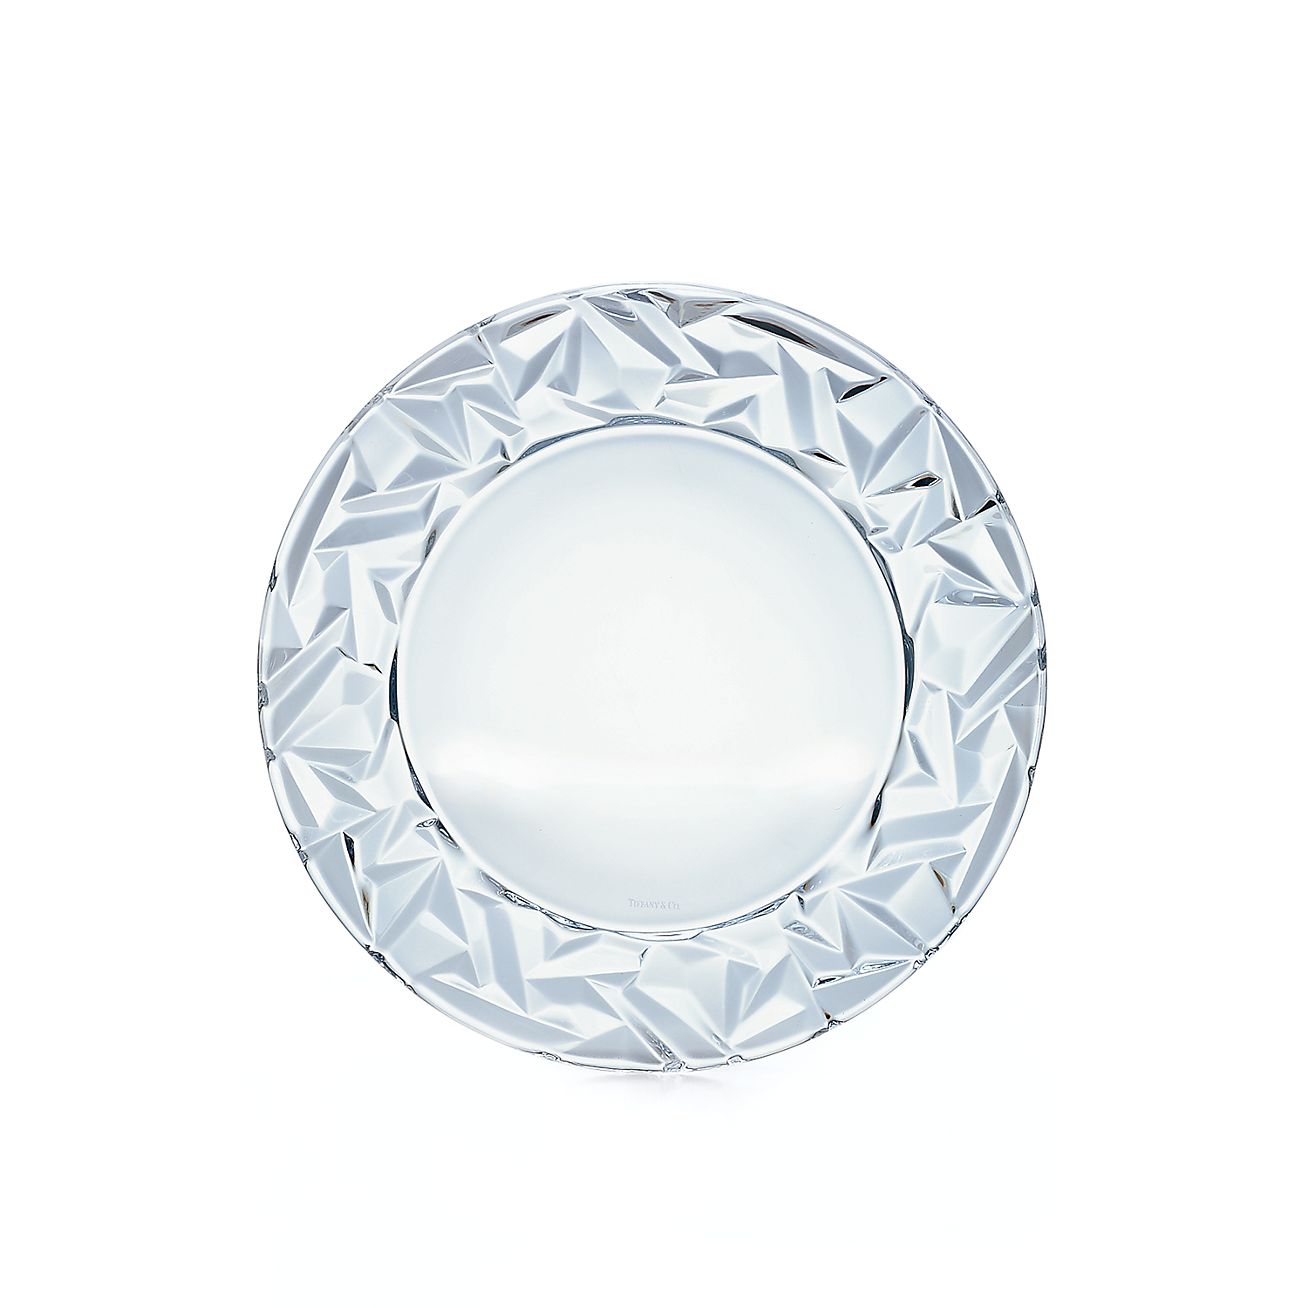 Rock-cut dinner plate in crystal glass 